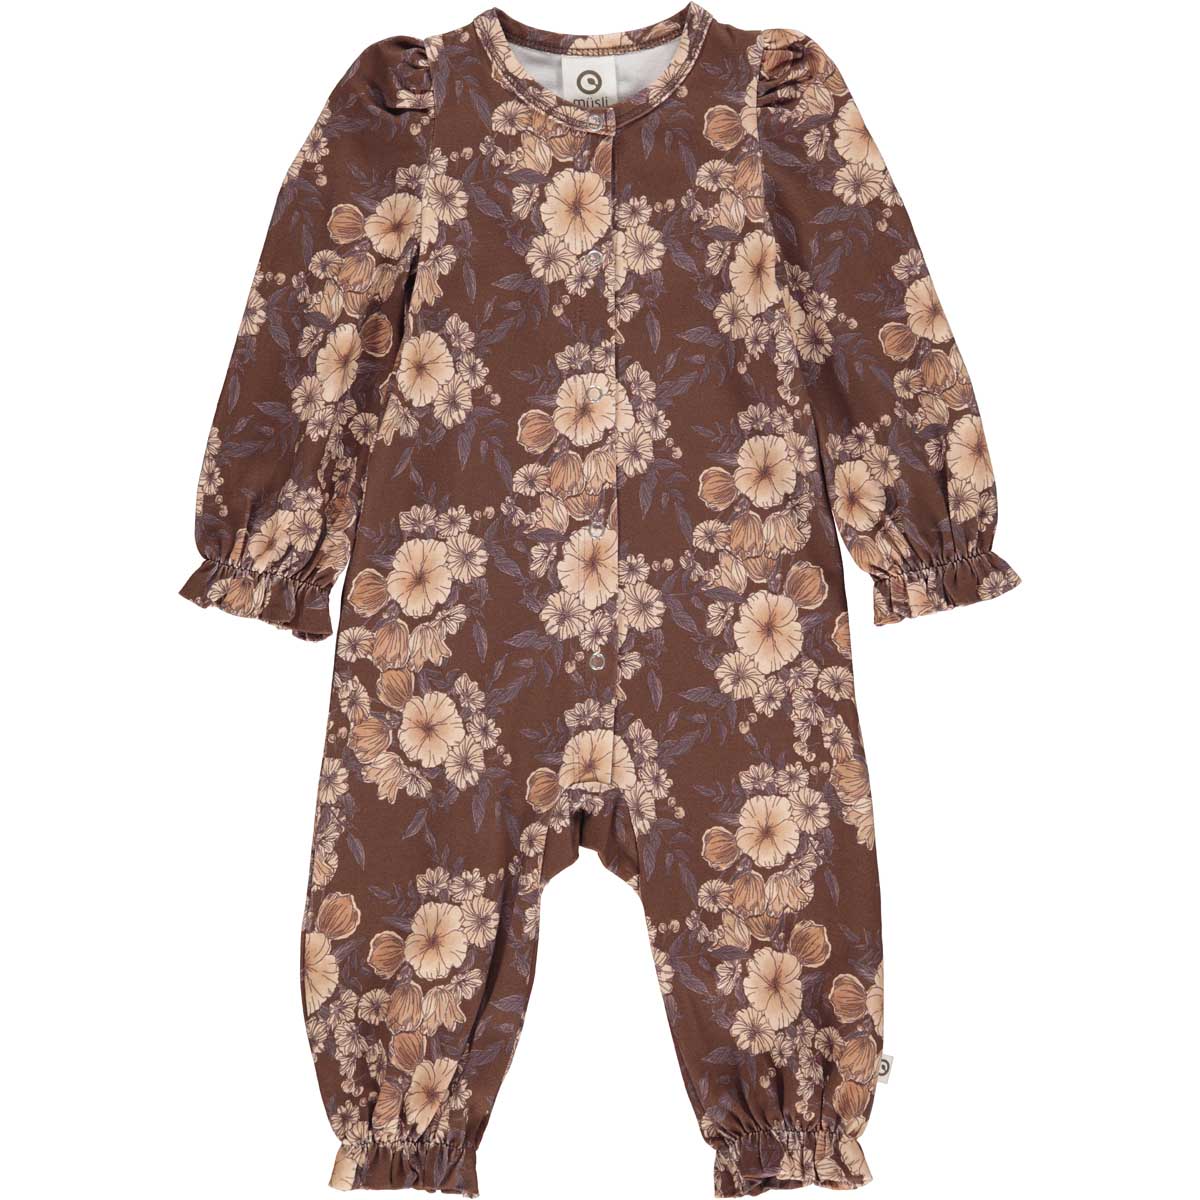 MAMA.LICIOUS Baby one-piece suit -Brown - 1584057800